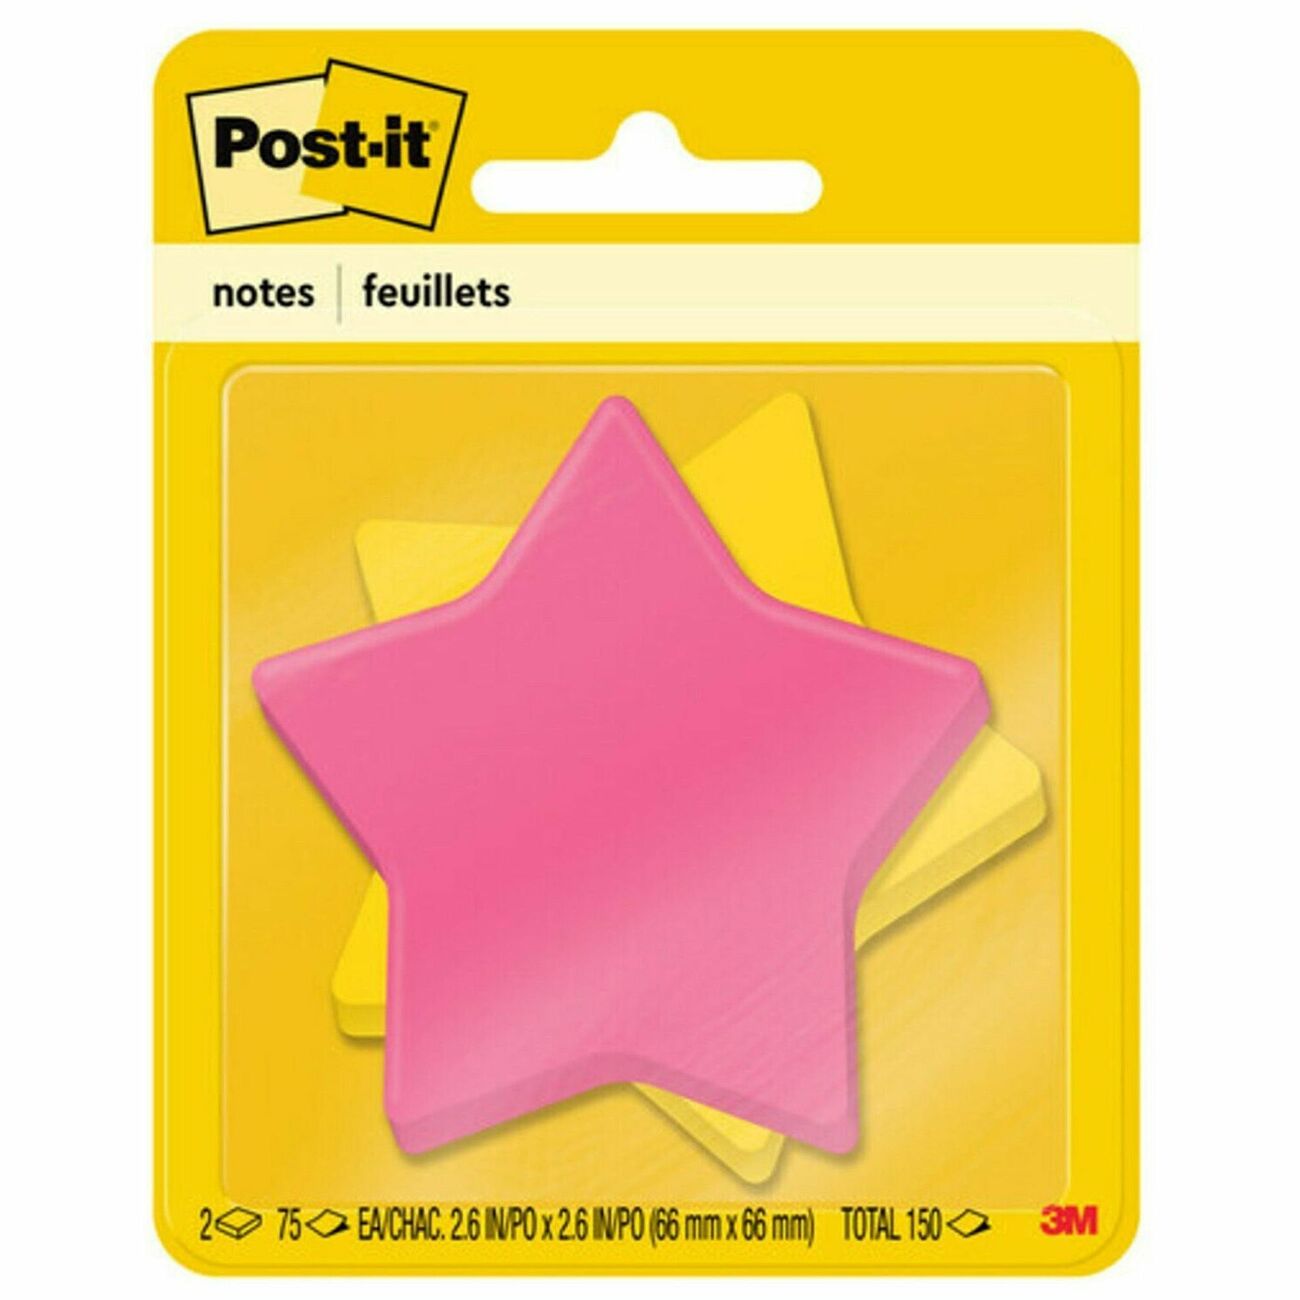 Post-it Notes Super Sticky Printed Note Pads, 4 x 8, Lined, Assorted Designs, 75-Sheet, 3/Pack